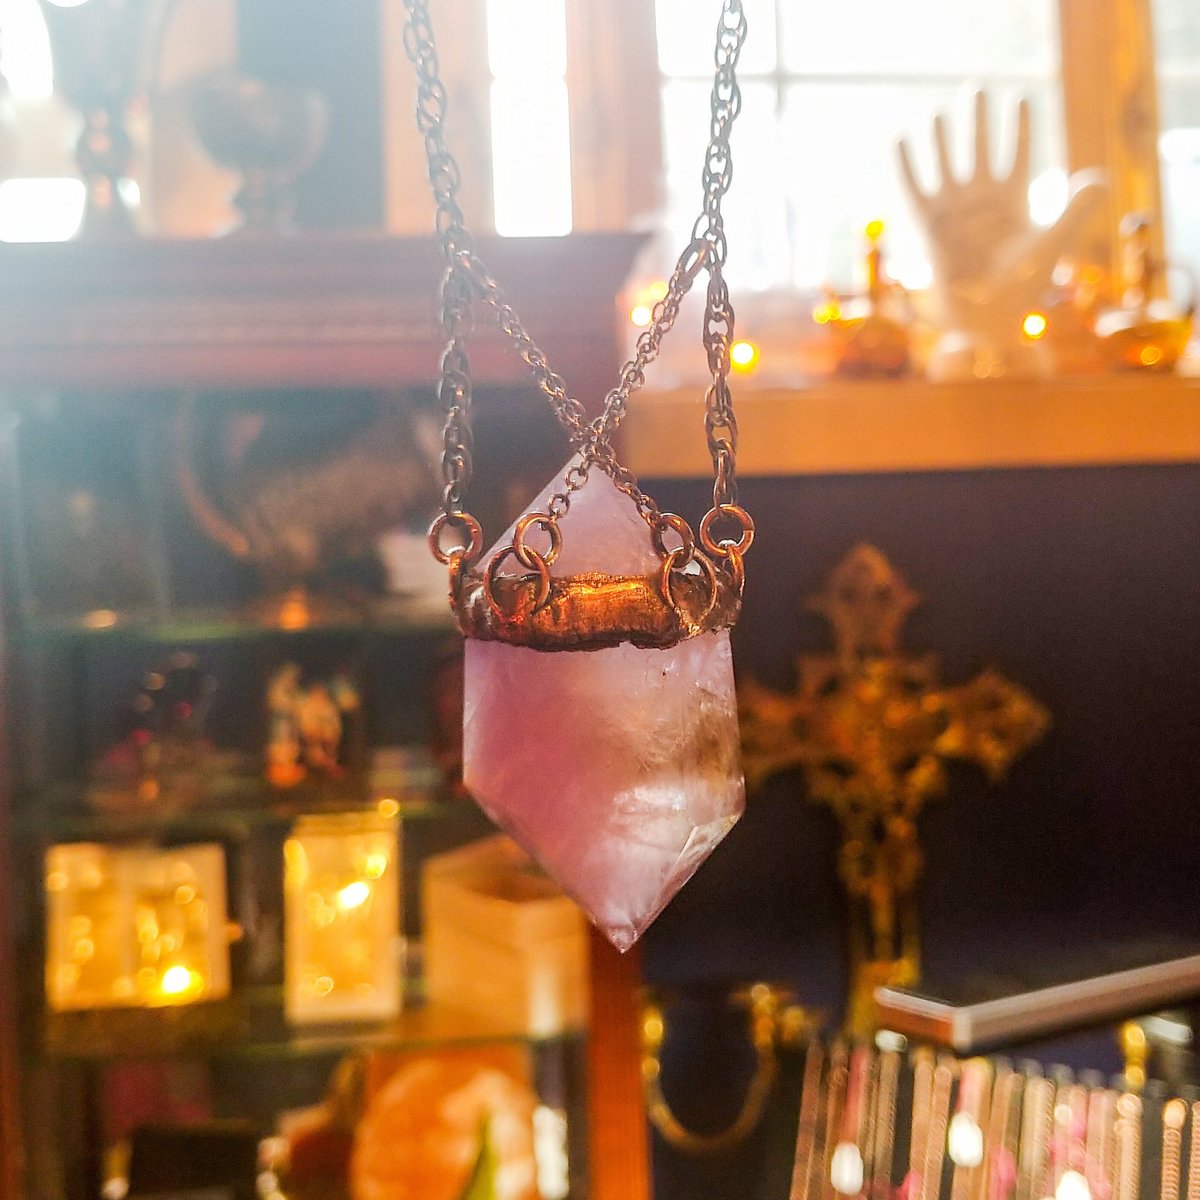 New addition to the family. Come and see it today at Bohemian Candle in Newport Oregon
.
#oregonsmallbusiness #shopsmall #shophandmade #handmadejewelry #handmadewithlove #crystaljewelry #ametrine #stunningjewelry #statementnecklace #witchythings #oneofakindjewelry